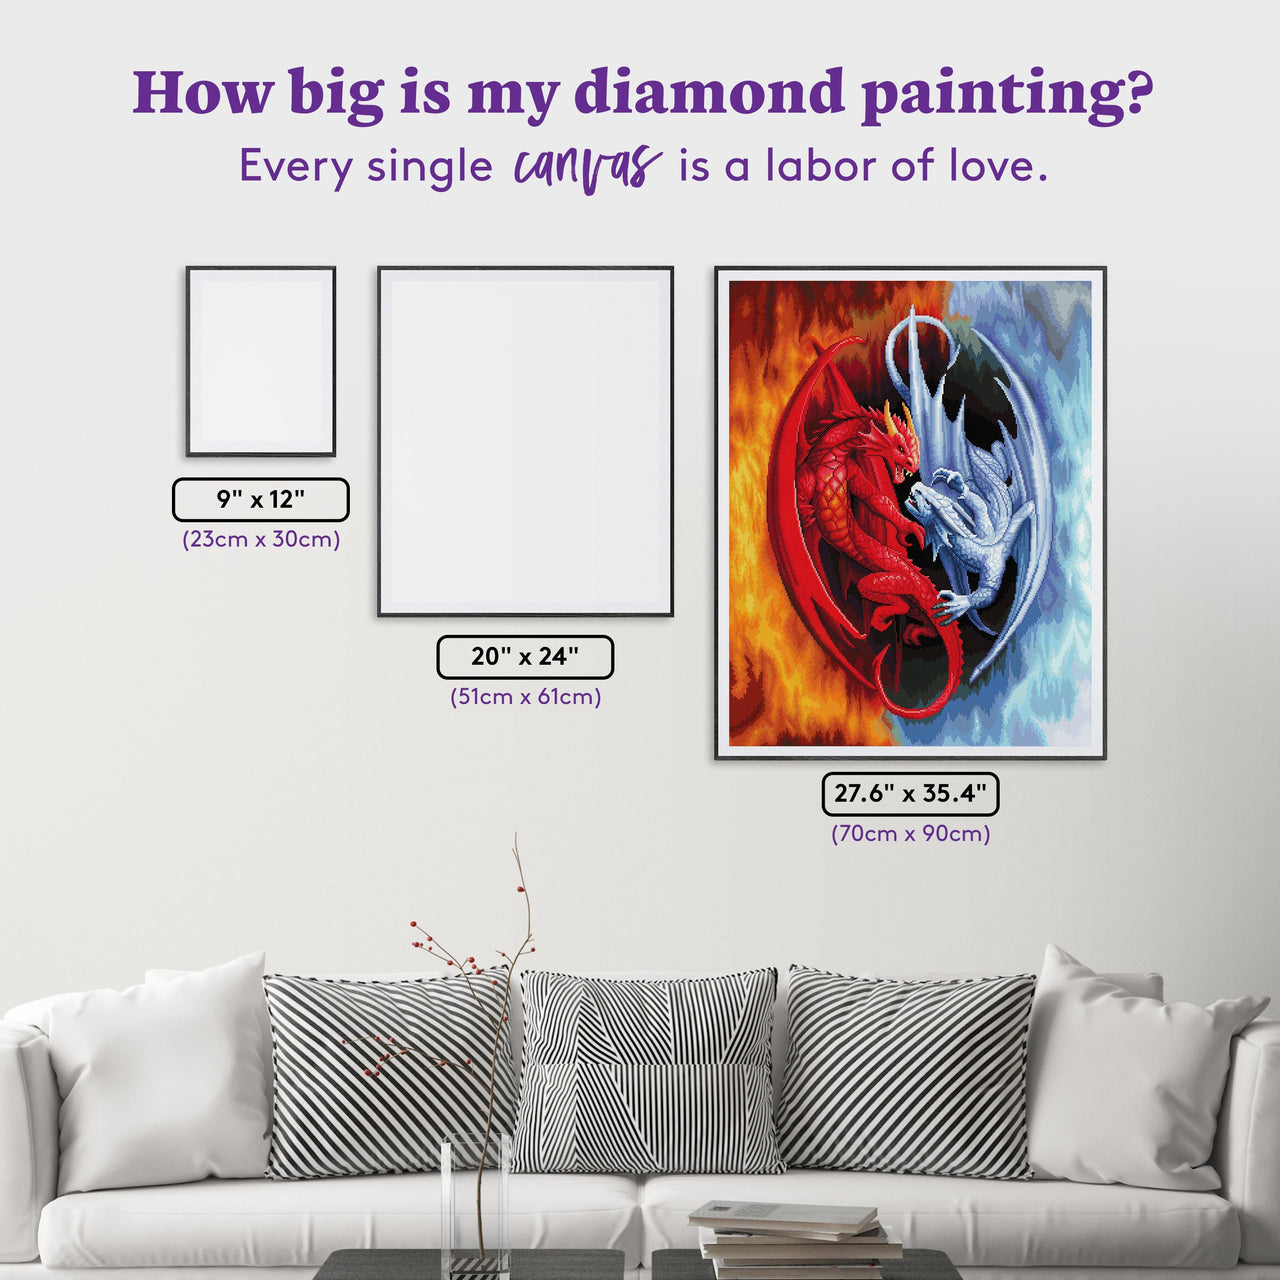 Diamond Painting Fire and Ice 27.8" x 35.4" (70cm x 90cm) / Square with 53 Colors including 2 ABs and 2 Fairy Dust Diamonds / 101,441